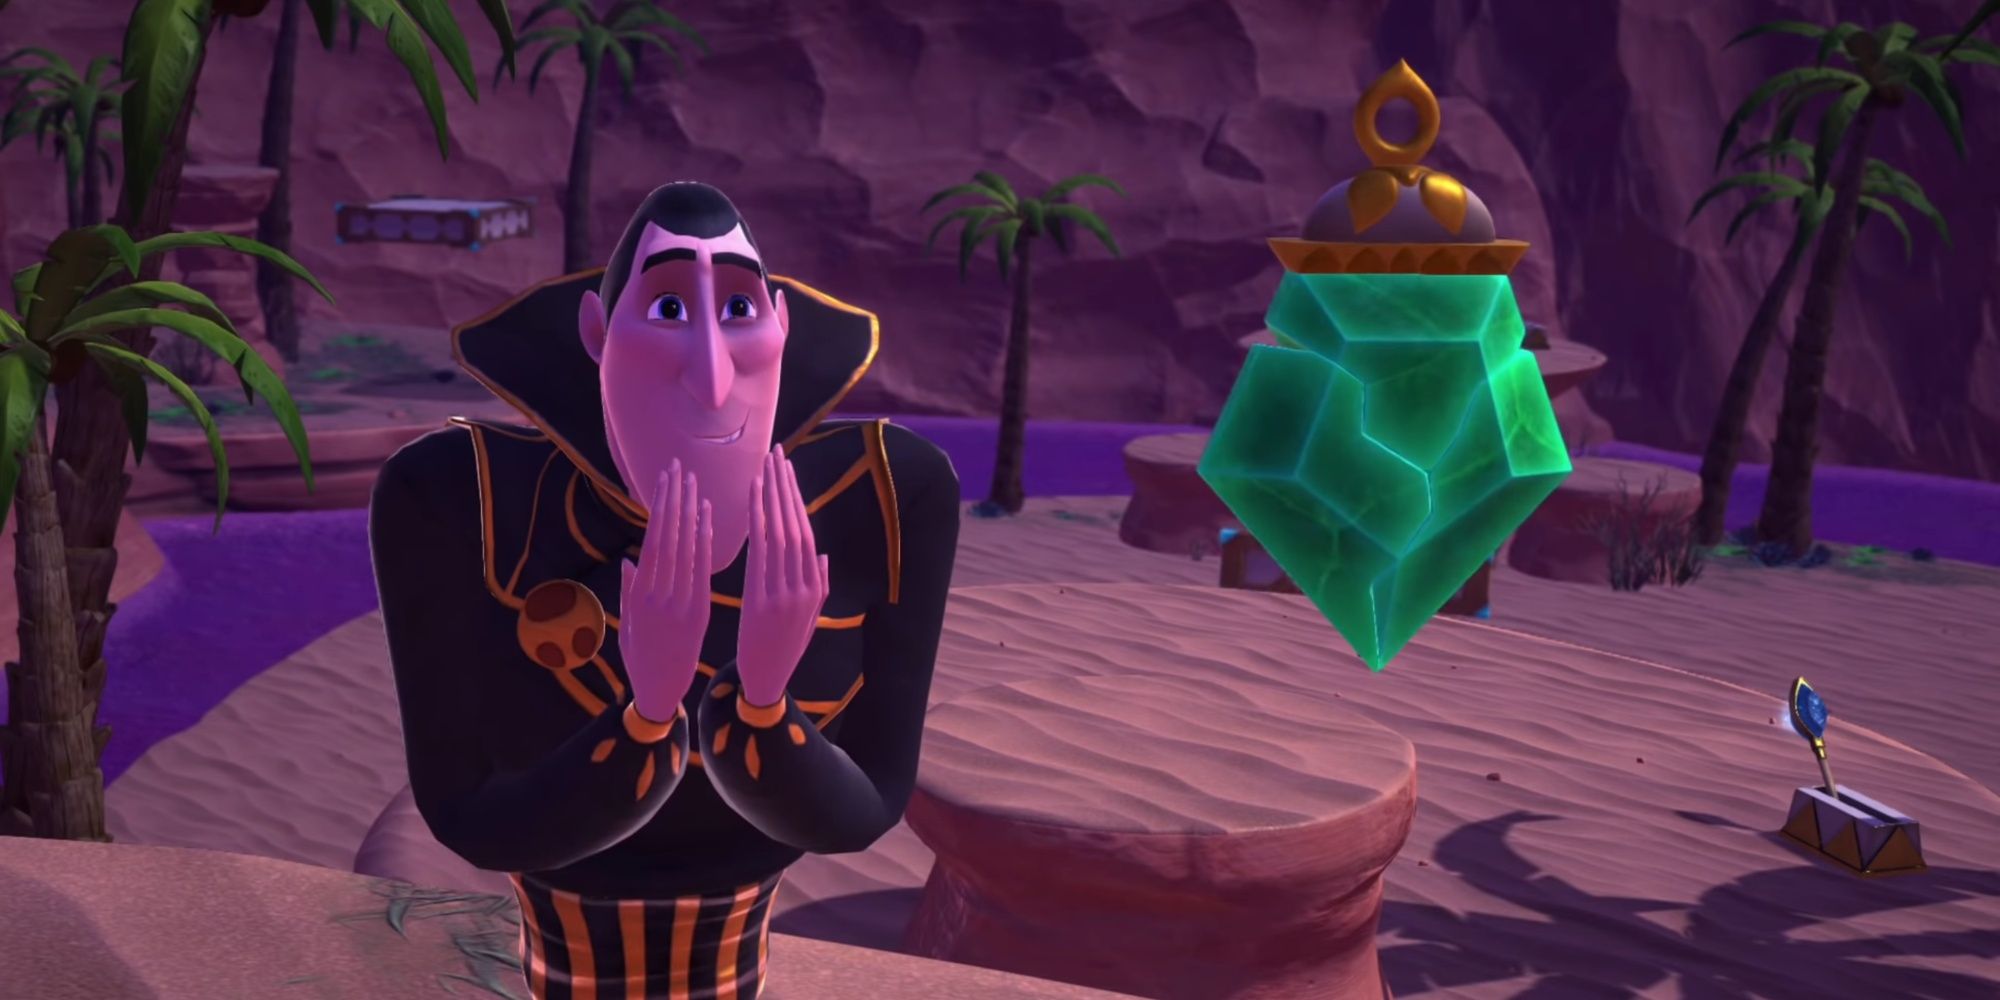 Dracula raises his hands over his chin and gazes at a green gemstone in the desert landscape.